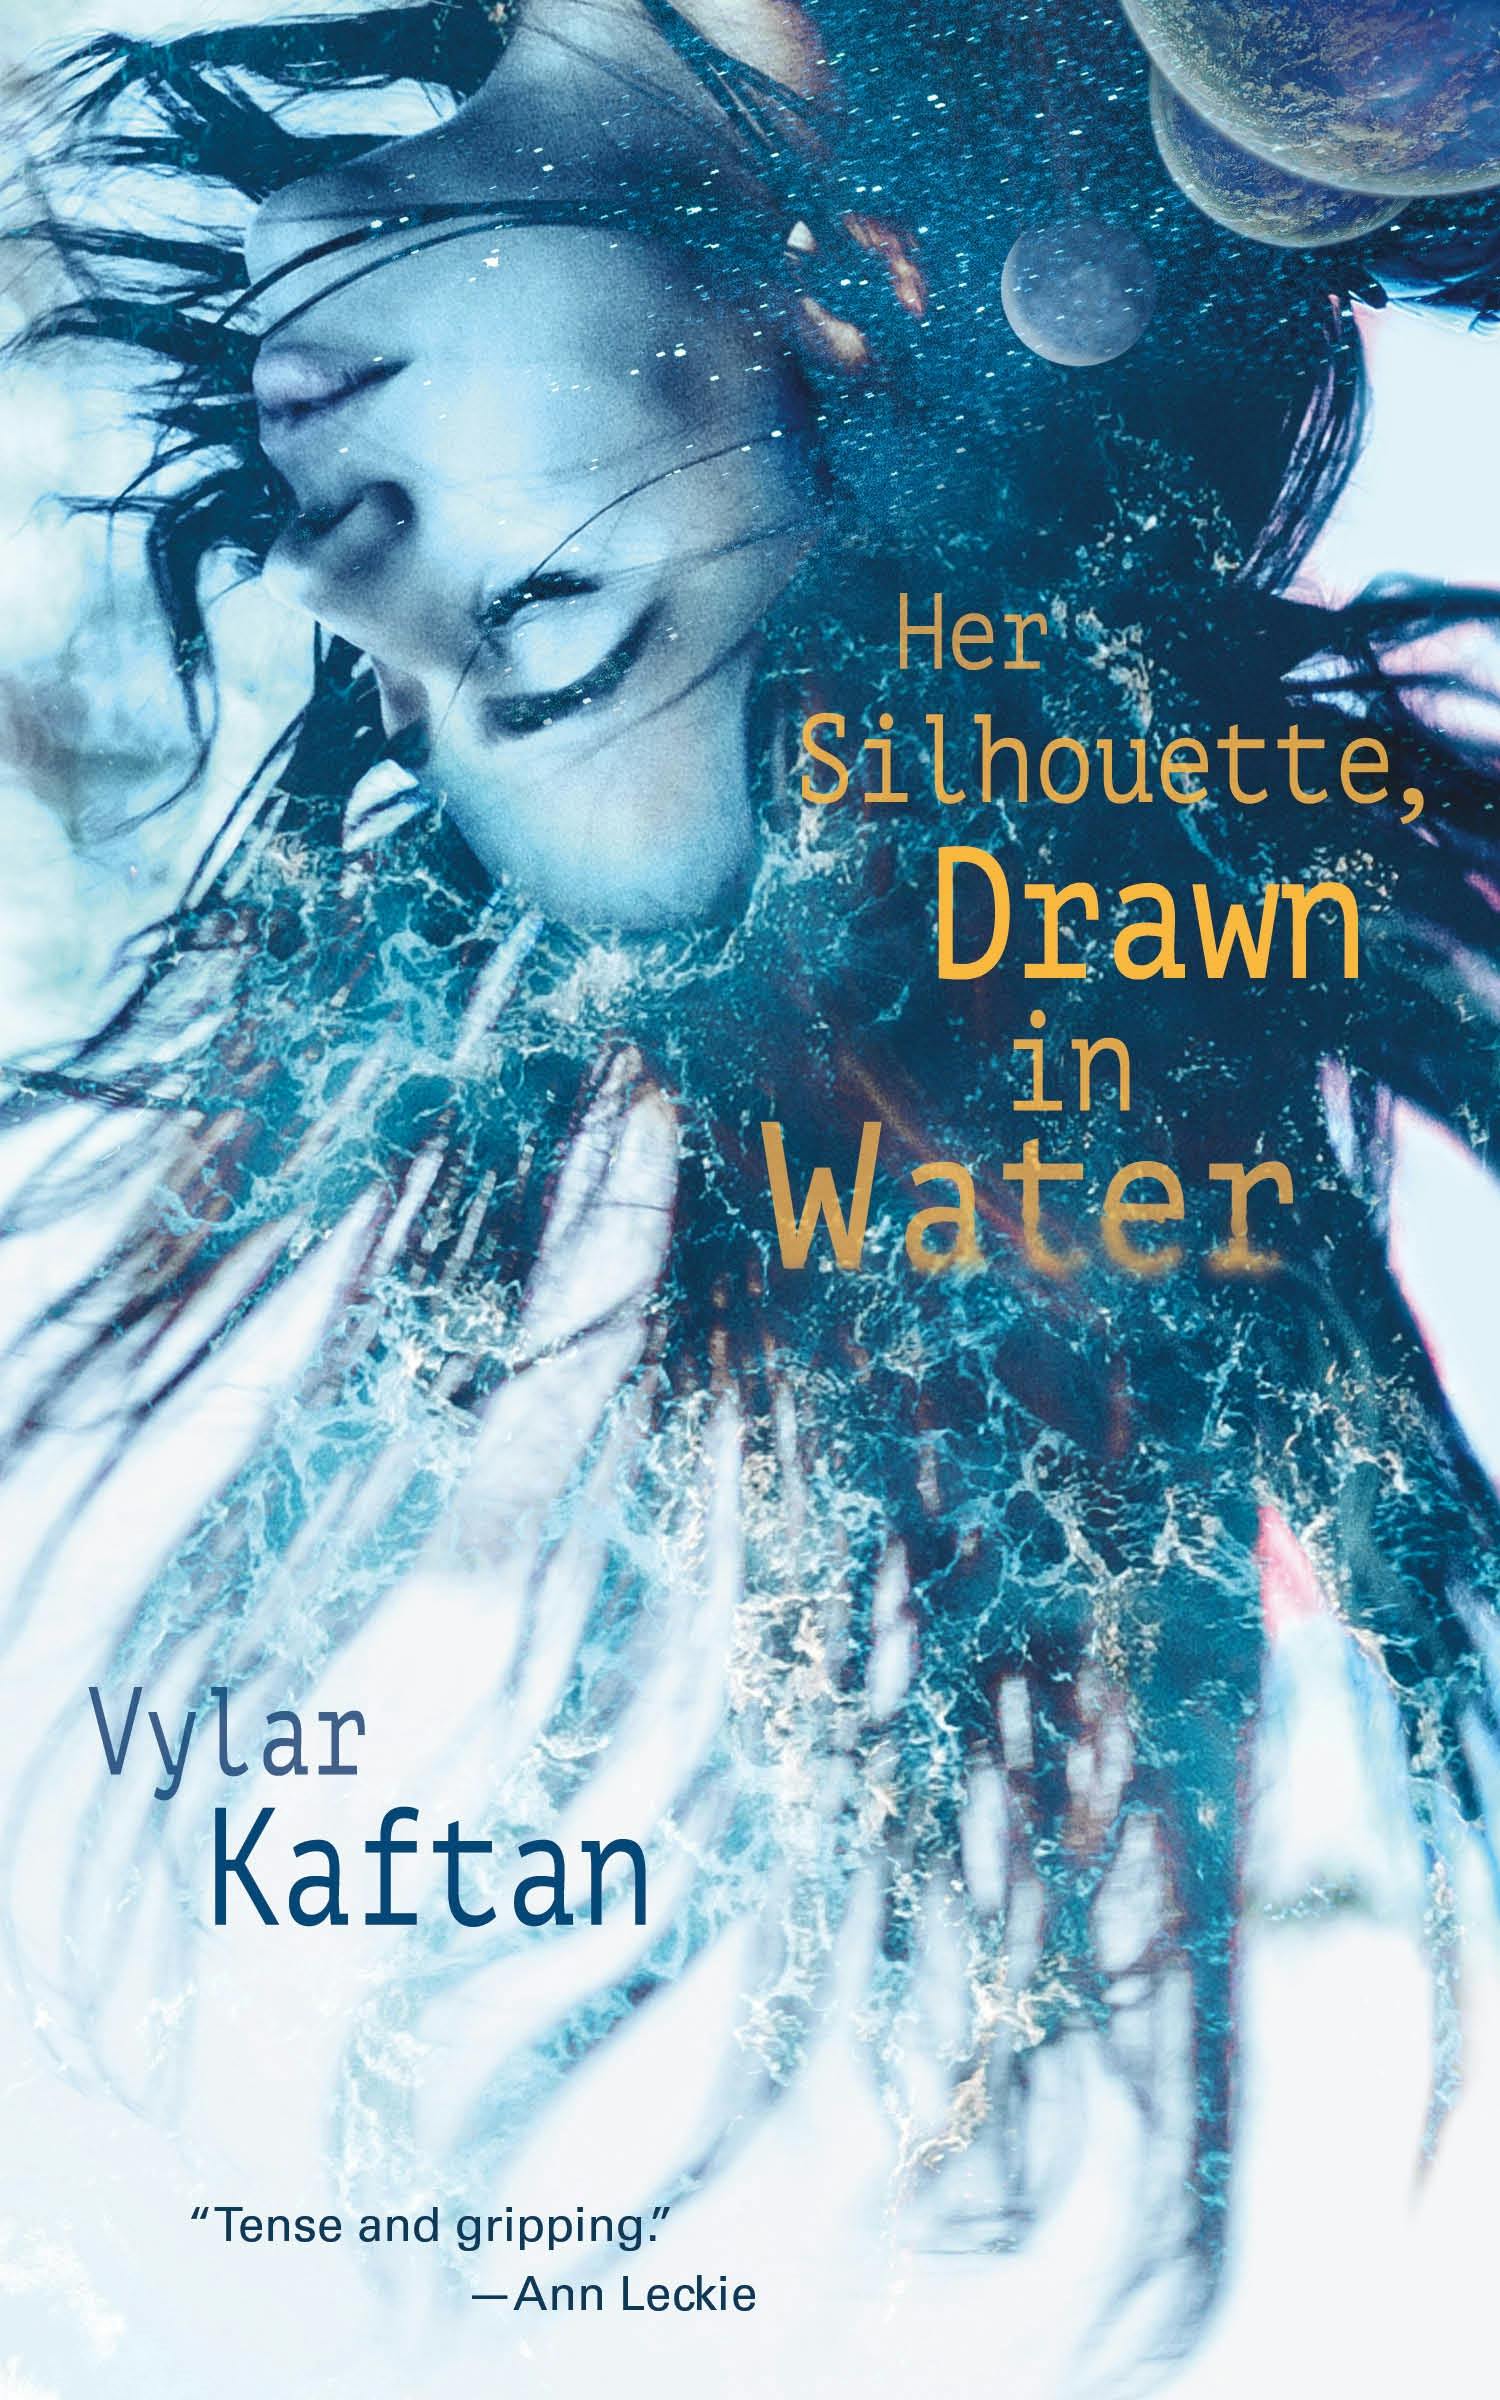 Cover for the book titled as: Her Silhouette, Drawn in Water